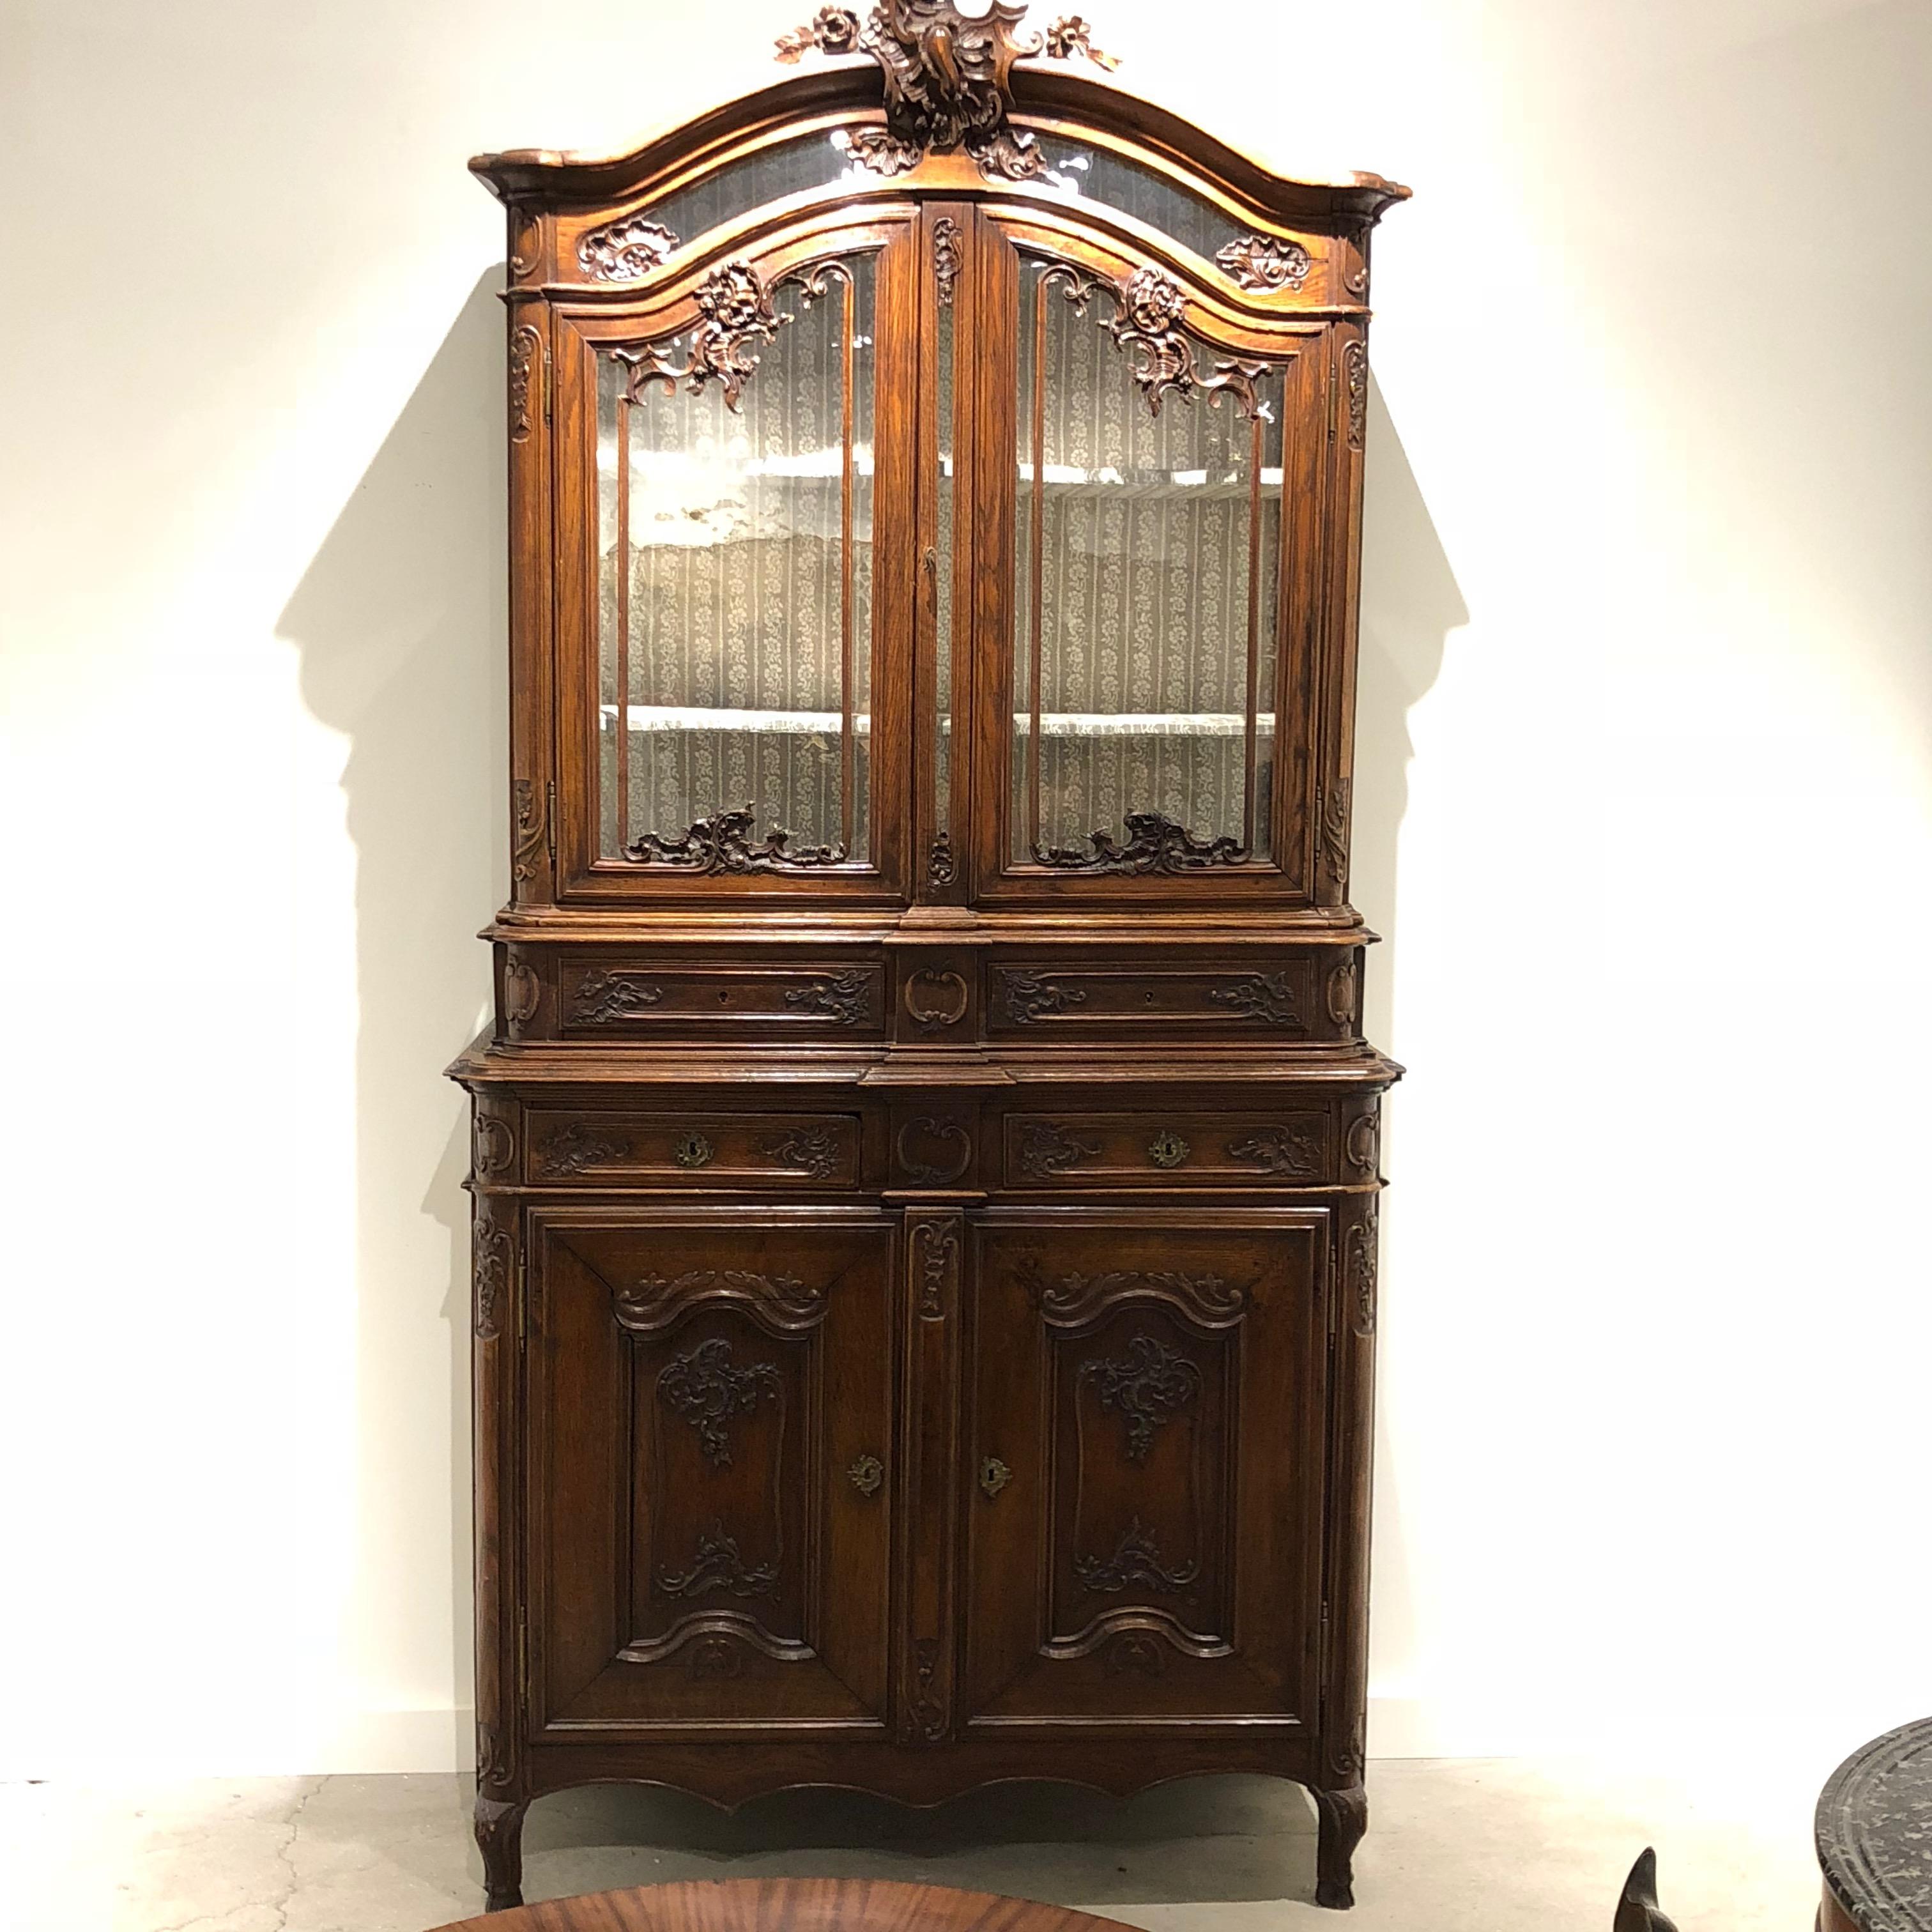 An elegant buffet deux corps with two doors that lock with a key, four small drawers that open in the centre and two glass doors that open with the turn of a small latch. Detailed with decorative wood carvings throughout, a beautiful carved crest